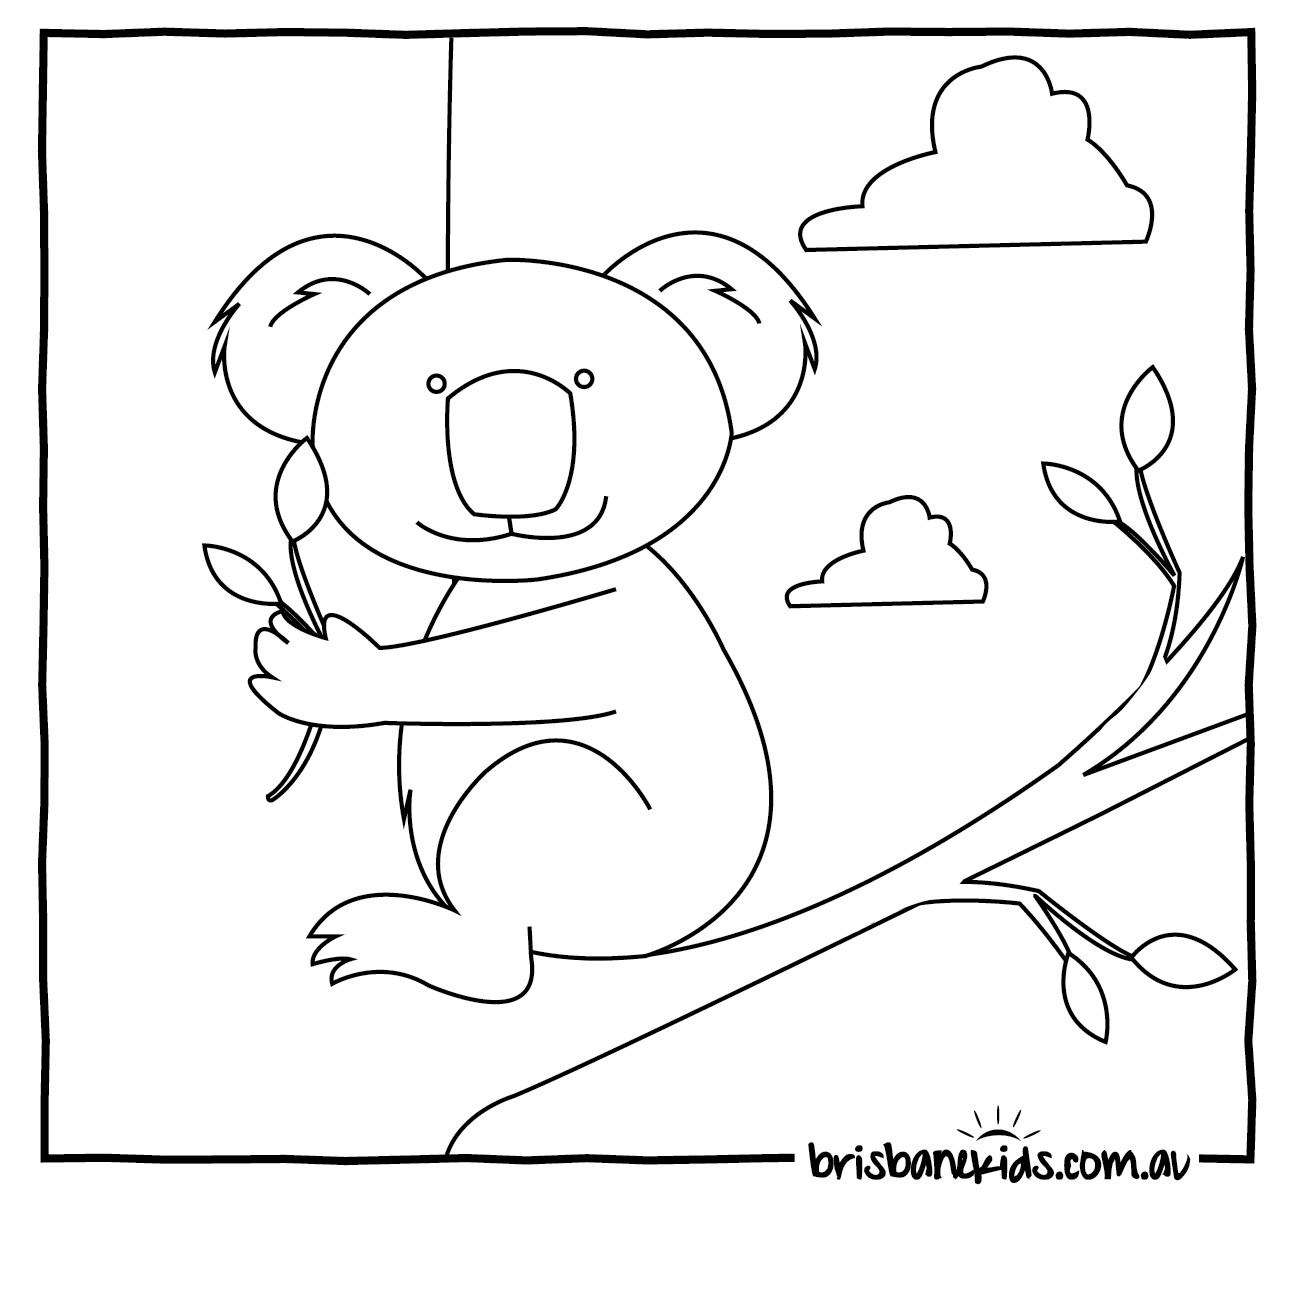 Animals Coloring Pages To Print
 Australian Animals Colouring Pages • Brisbane Kids